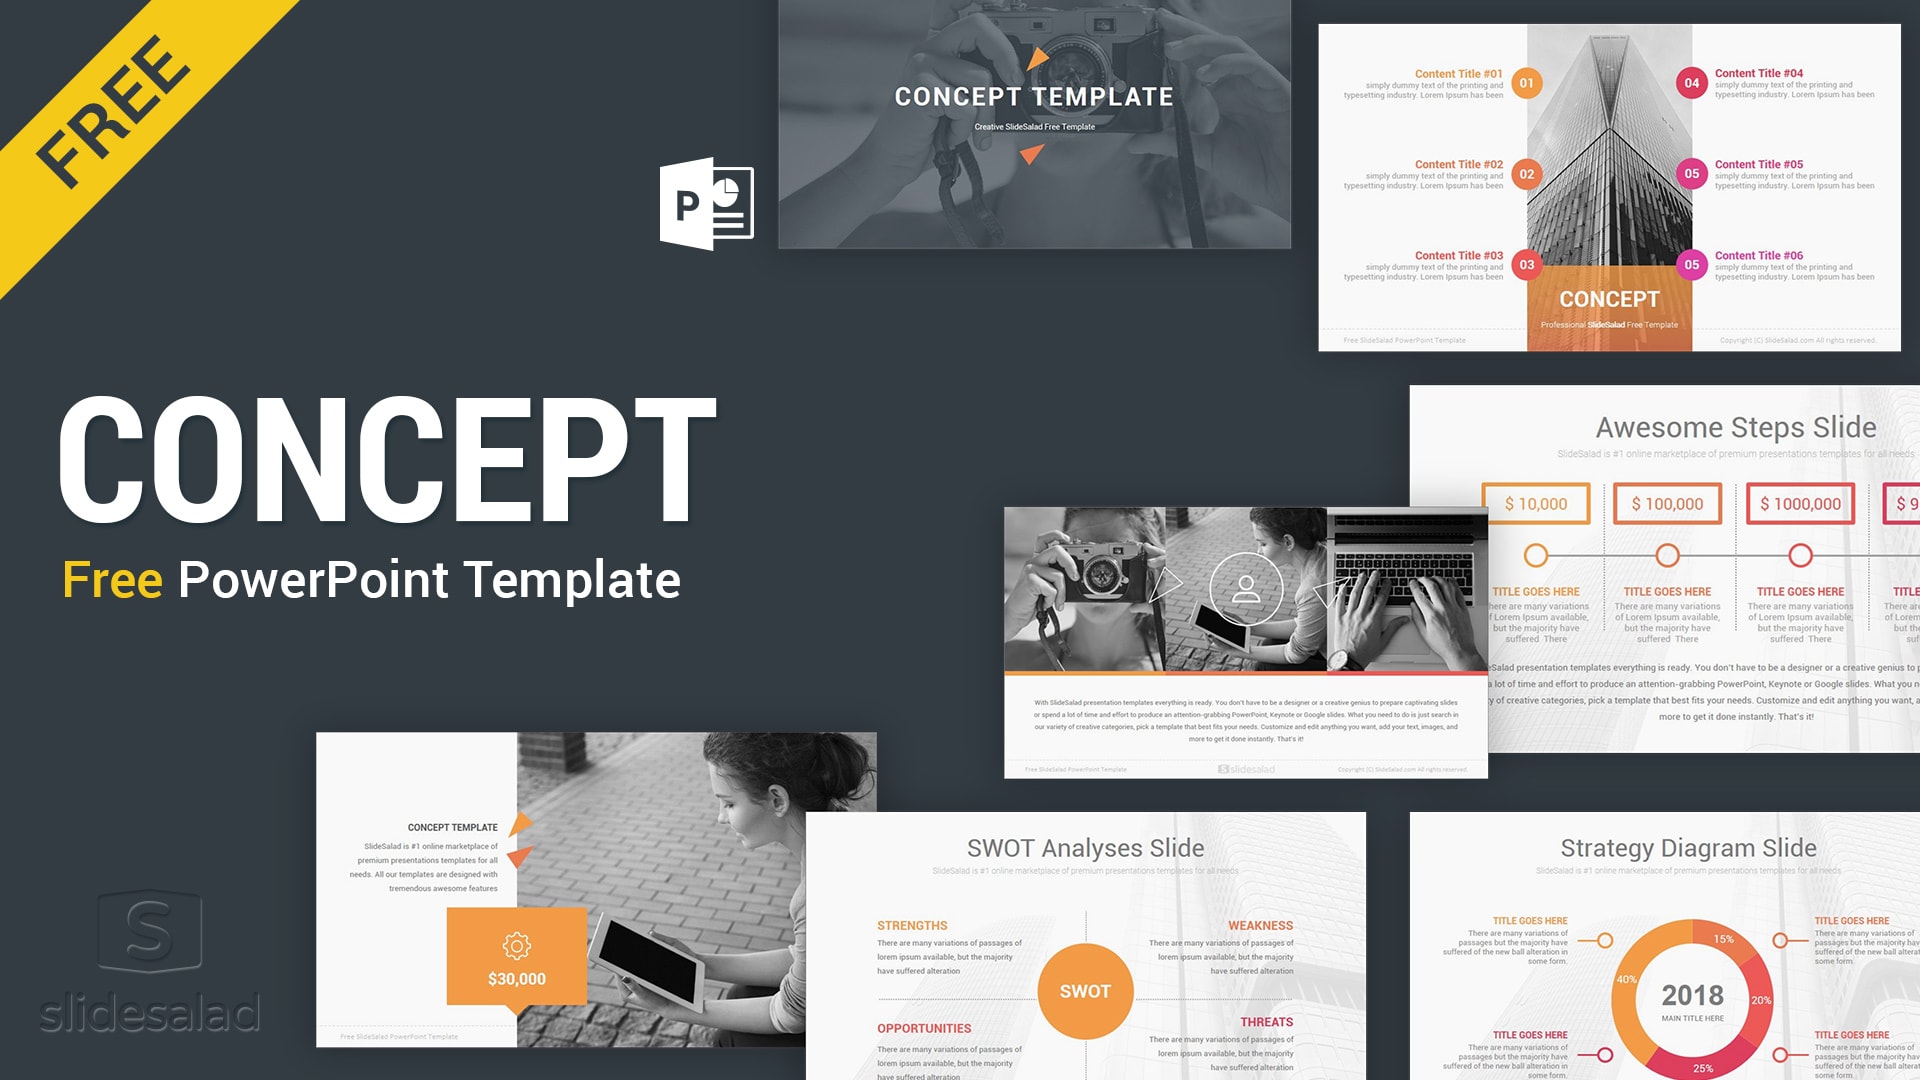 Concept Free PowerPoint Presentation Template - Free Download PPT For Powerpoint Photo Slideshow Template